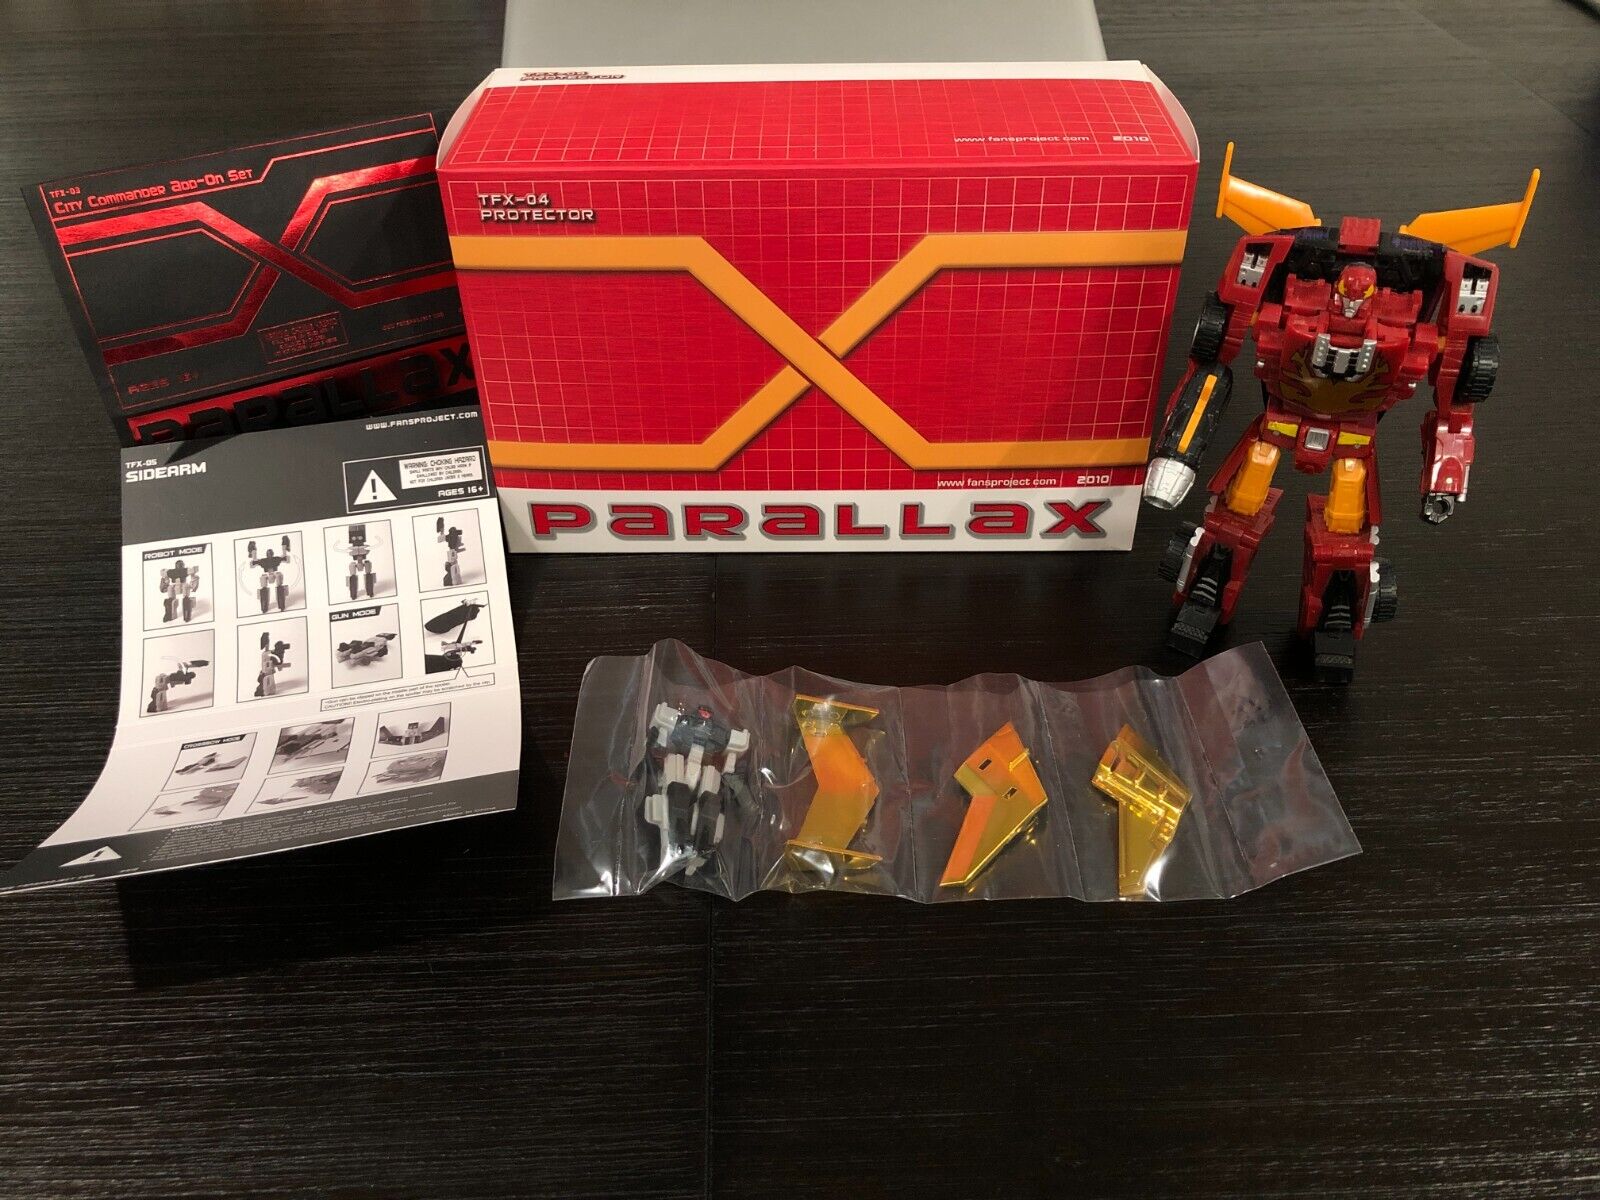 Transformers Fansproject TFX-04 Parallax PROTECTOR with Classics Hot Rod